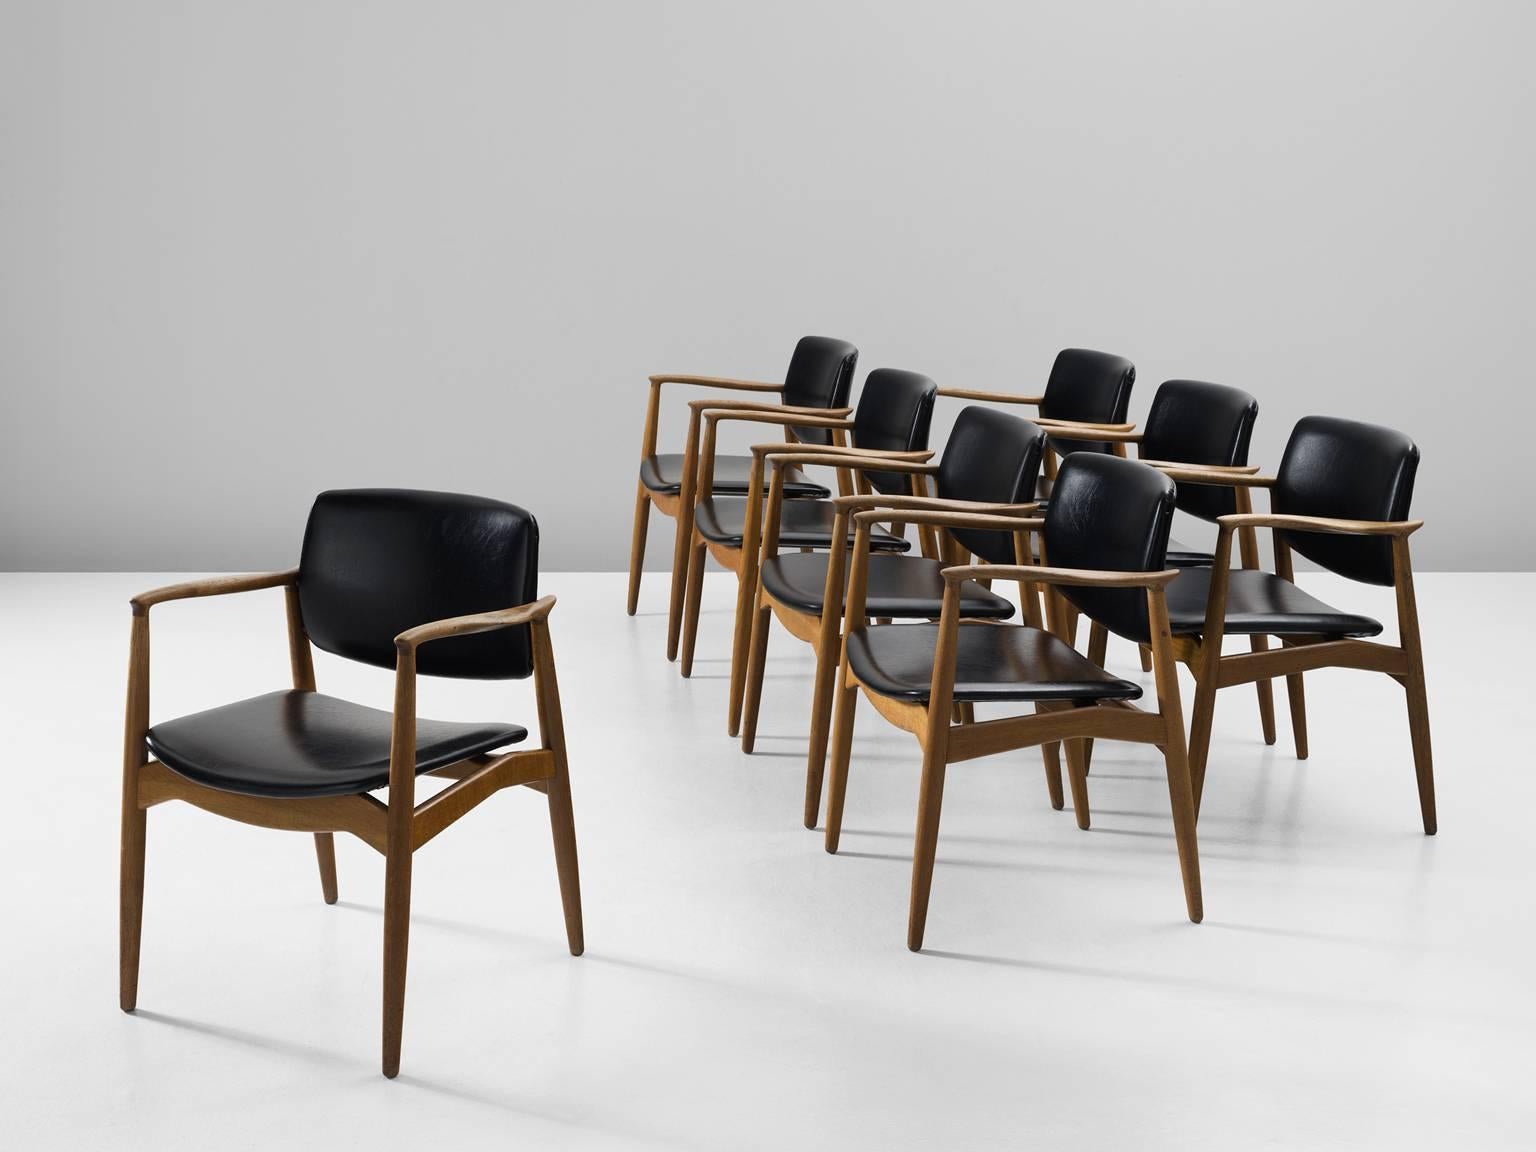 Set of eight 'Captains' armchairs, in oak and faux-leather by Erik Buck for Ørum Møbler, Denmark, 1957. 

Set of eight sculpted dining chairs in solid oak. These chairs show the characteristics of the well-known model 50 by Erik Buck. Yet this